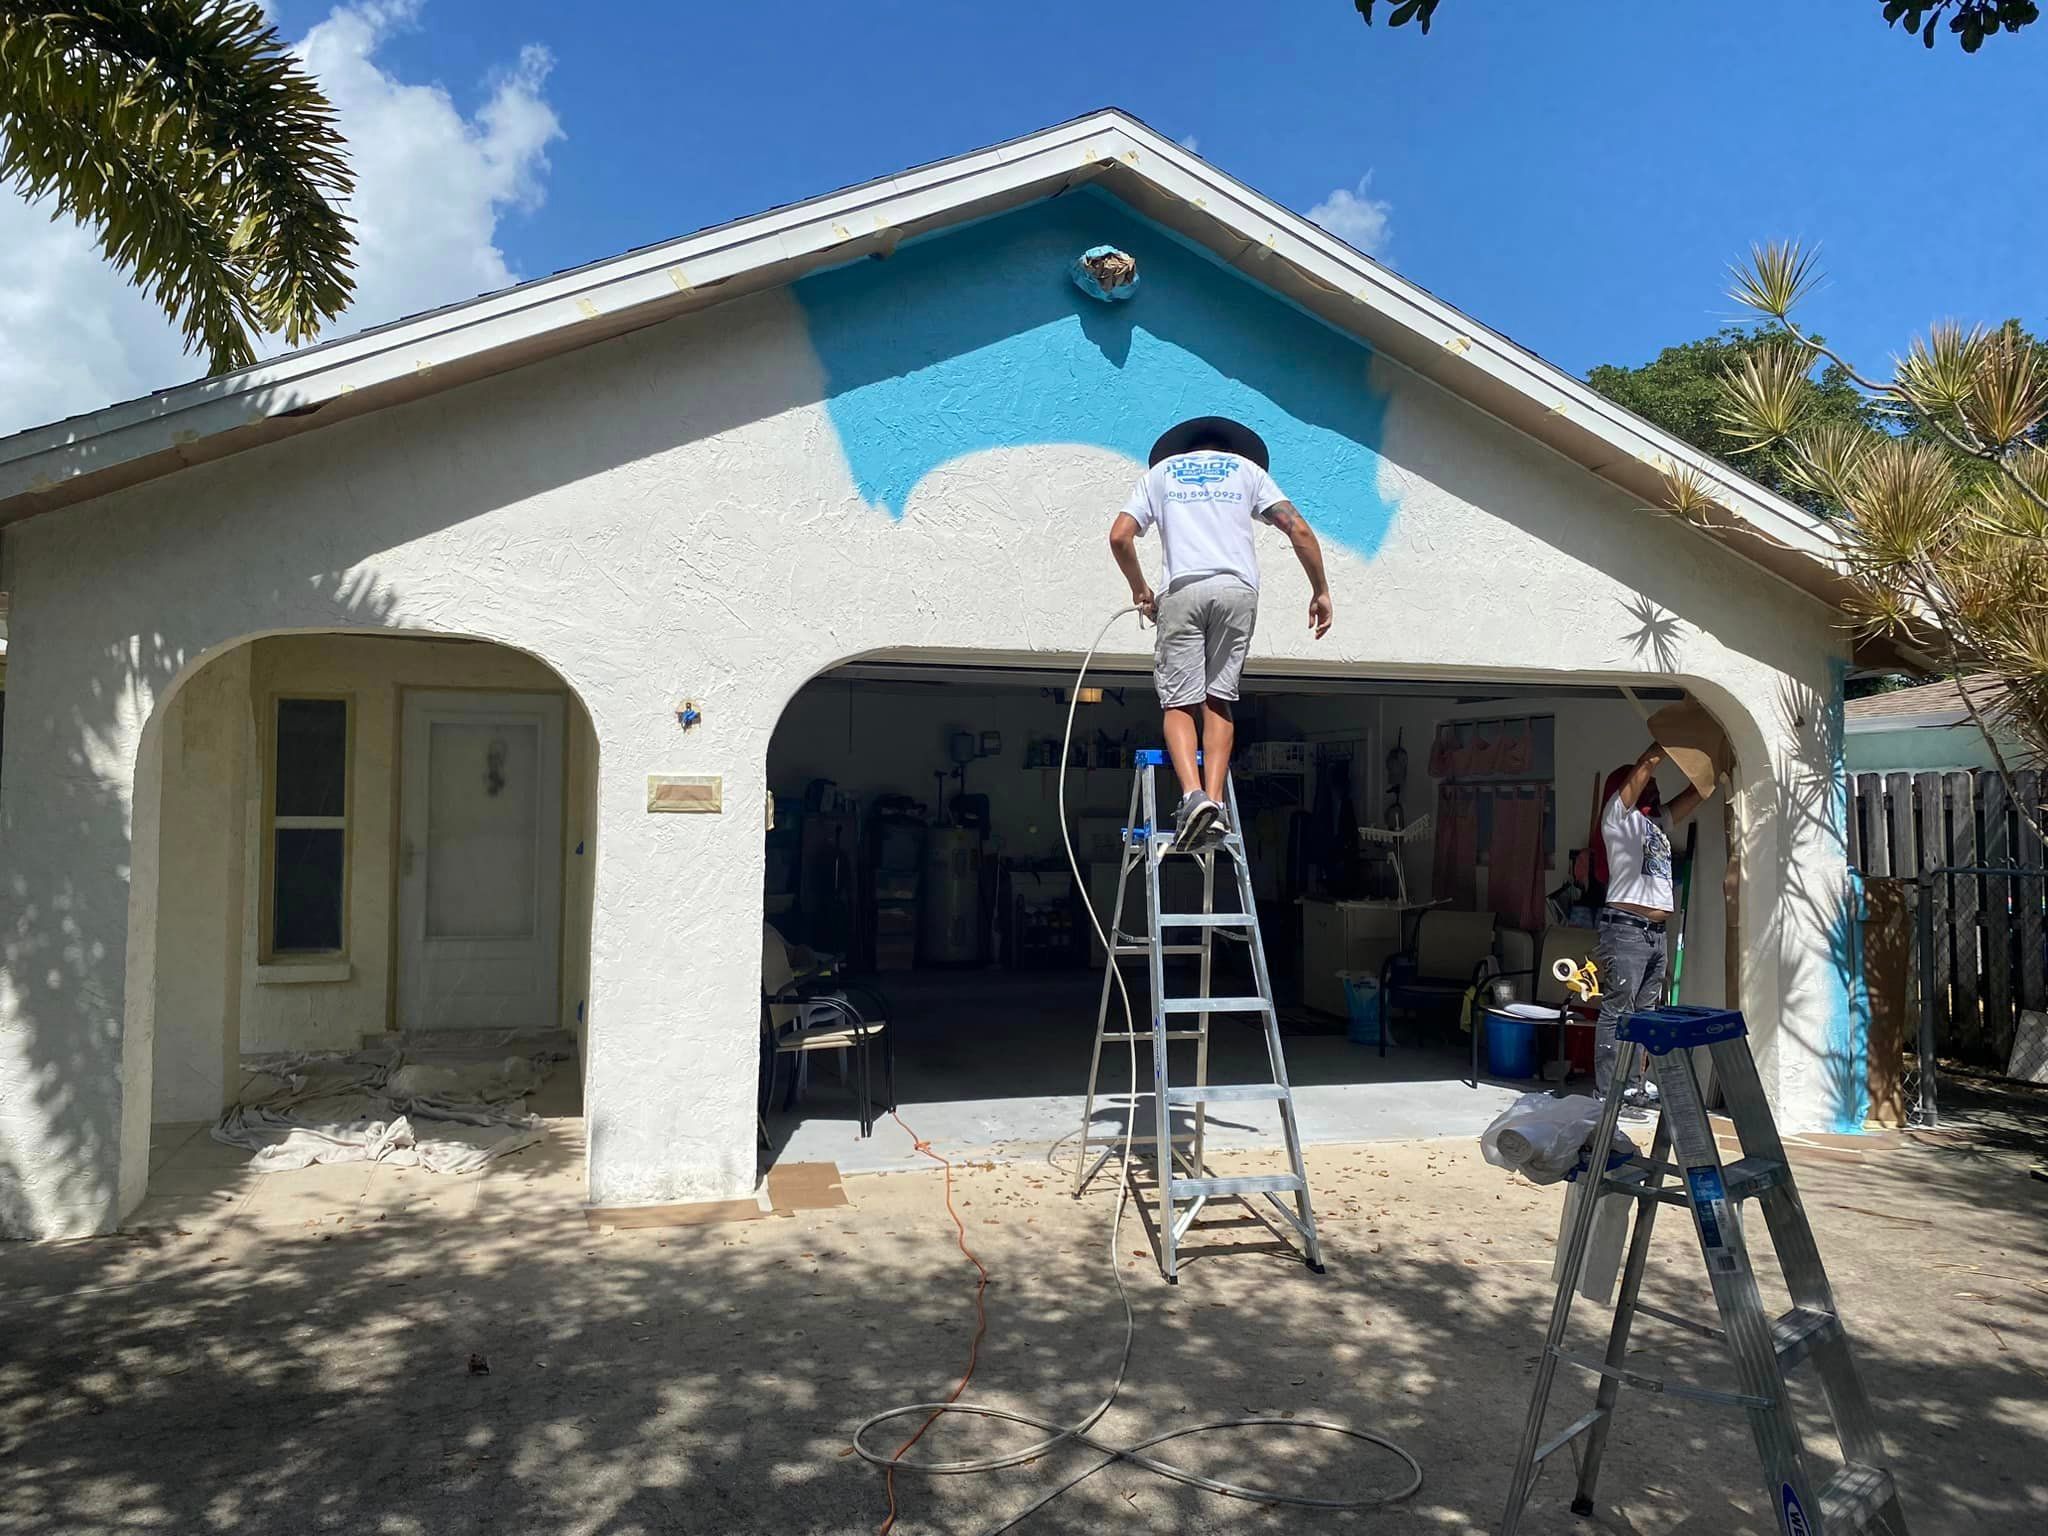 Exterior Painting for New Color Painting in Orlando, FL